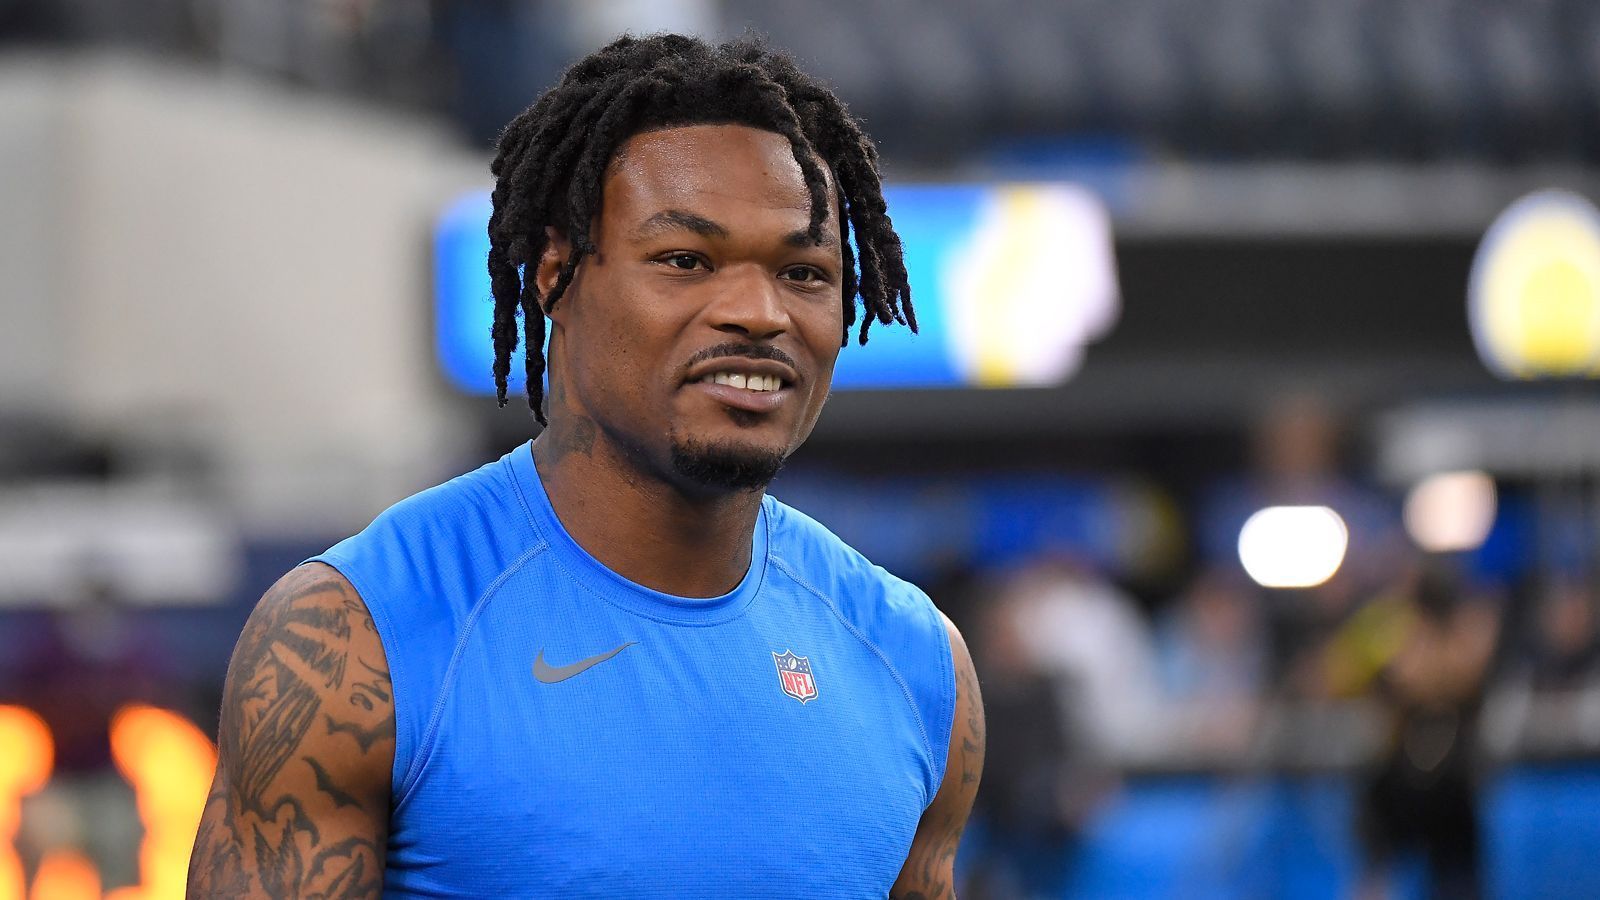 
                <strong>Platz 2: Derwin James Jr</strong><br>
                &#x2022; Team: Los Angeles Chargers<br>&#x2022; Position: Strong Safety<br>&#x2022; <strong>Overall Rating: 93</strong><br>&#x2022; Beste Key Stats: Acceleration: 93 - Jumping: 93 - Stamina: 94<br>
              